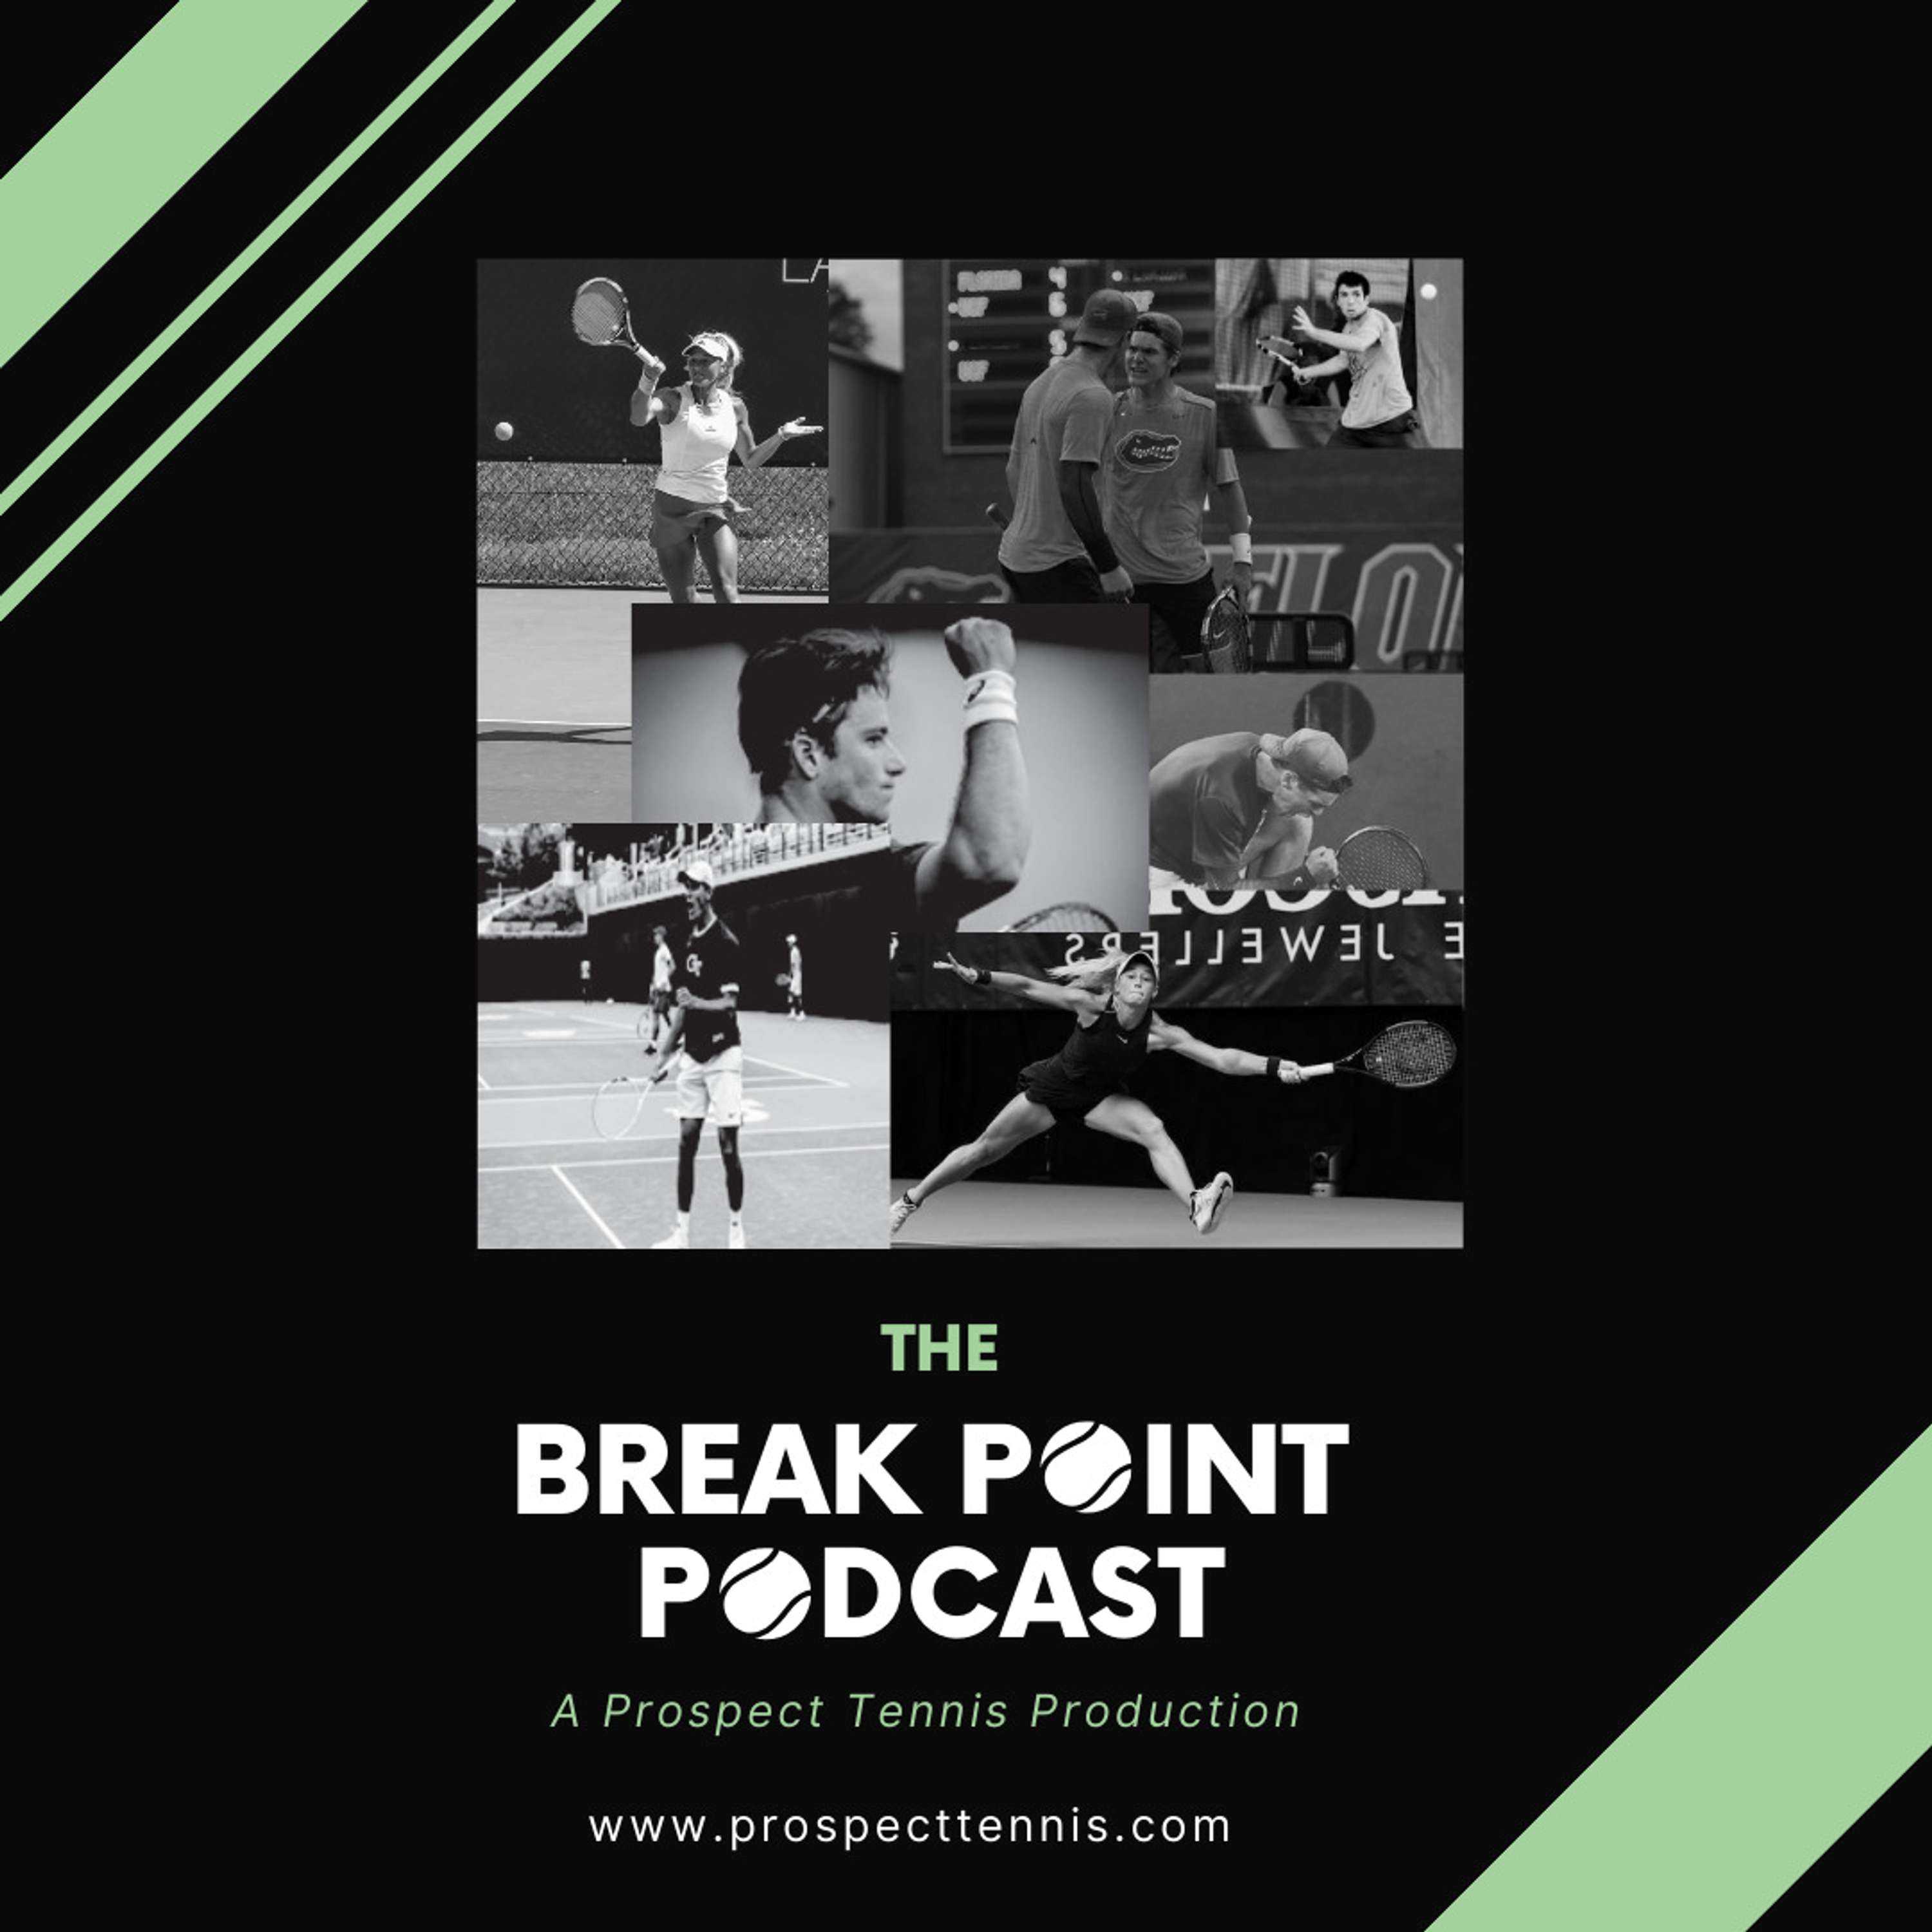 The Break Point Podcast